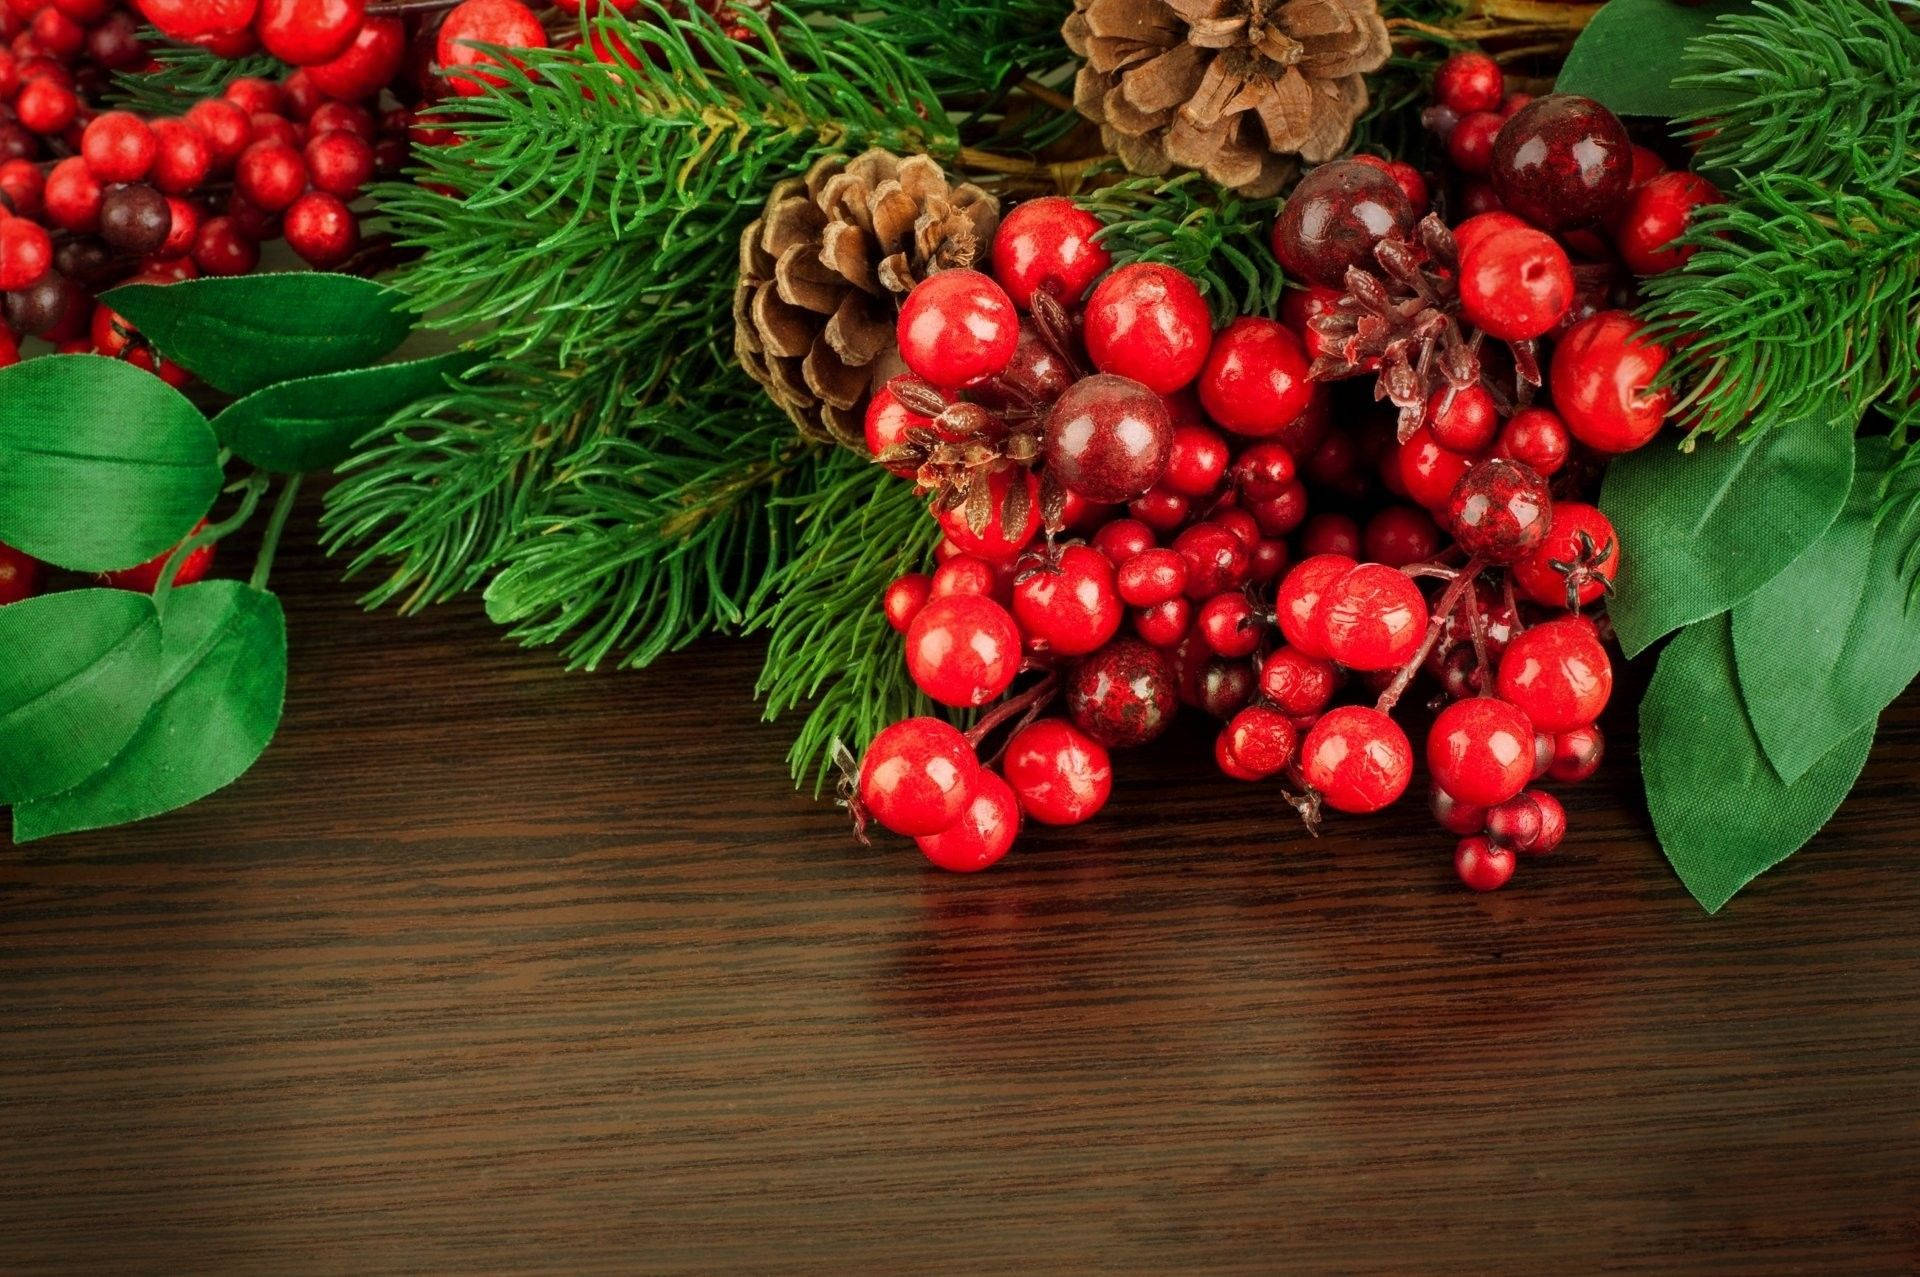 Christmas Wreath With Cluster Of Cherries Background